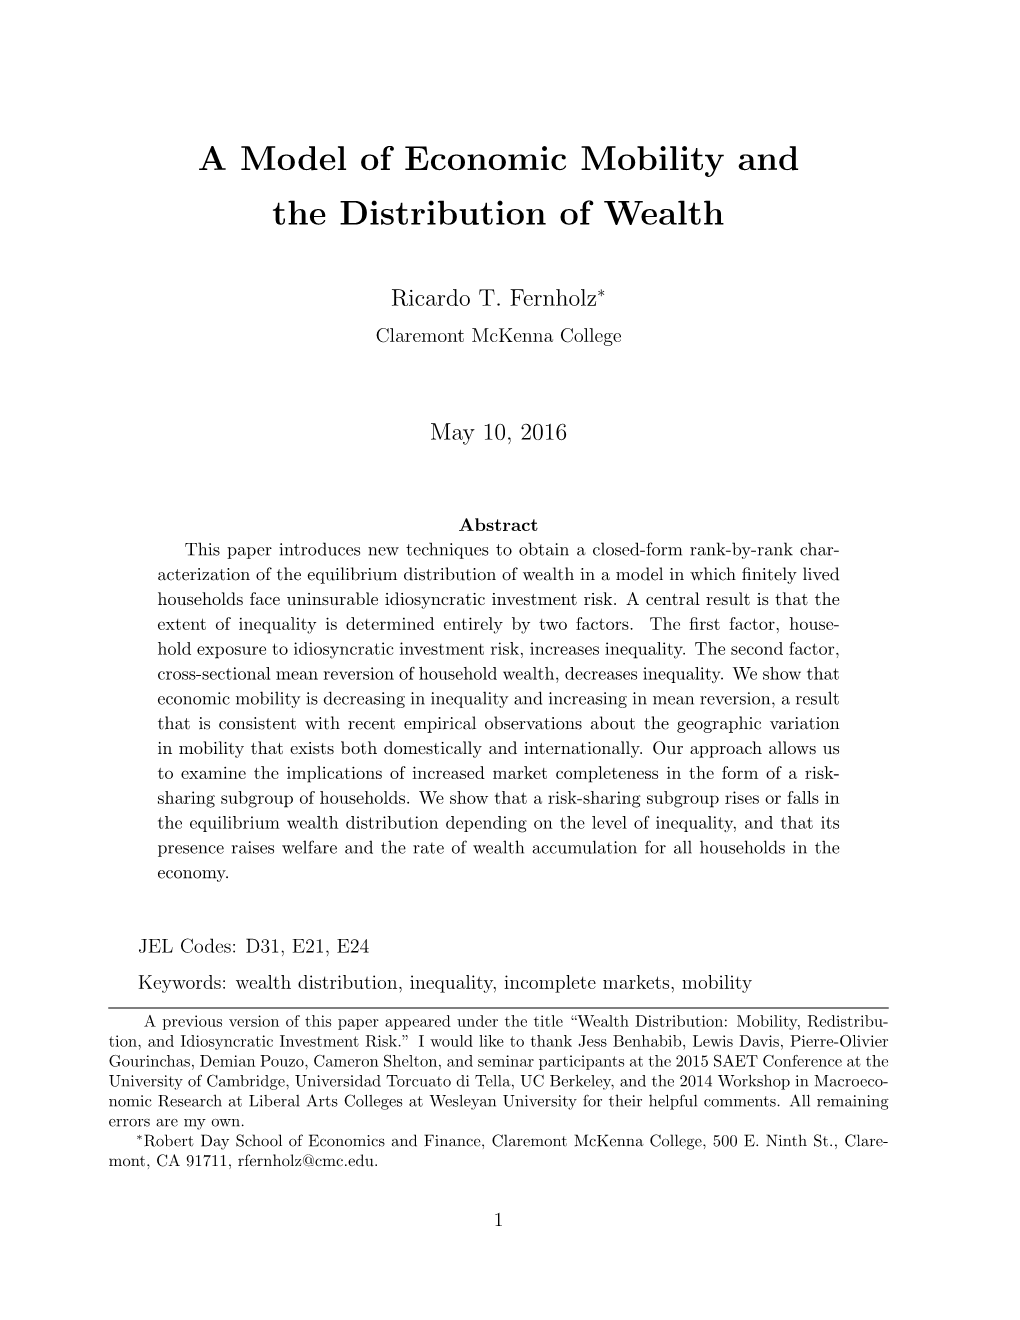 A Model of Economic Mobility and the Distribution of Wealth